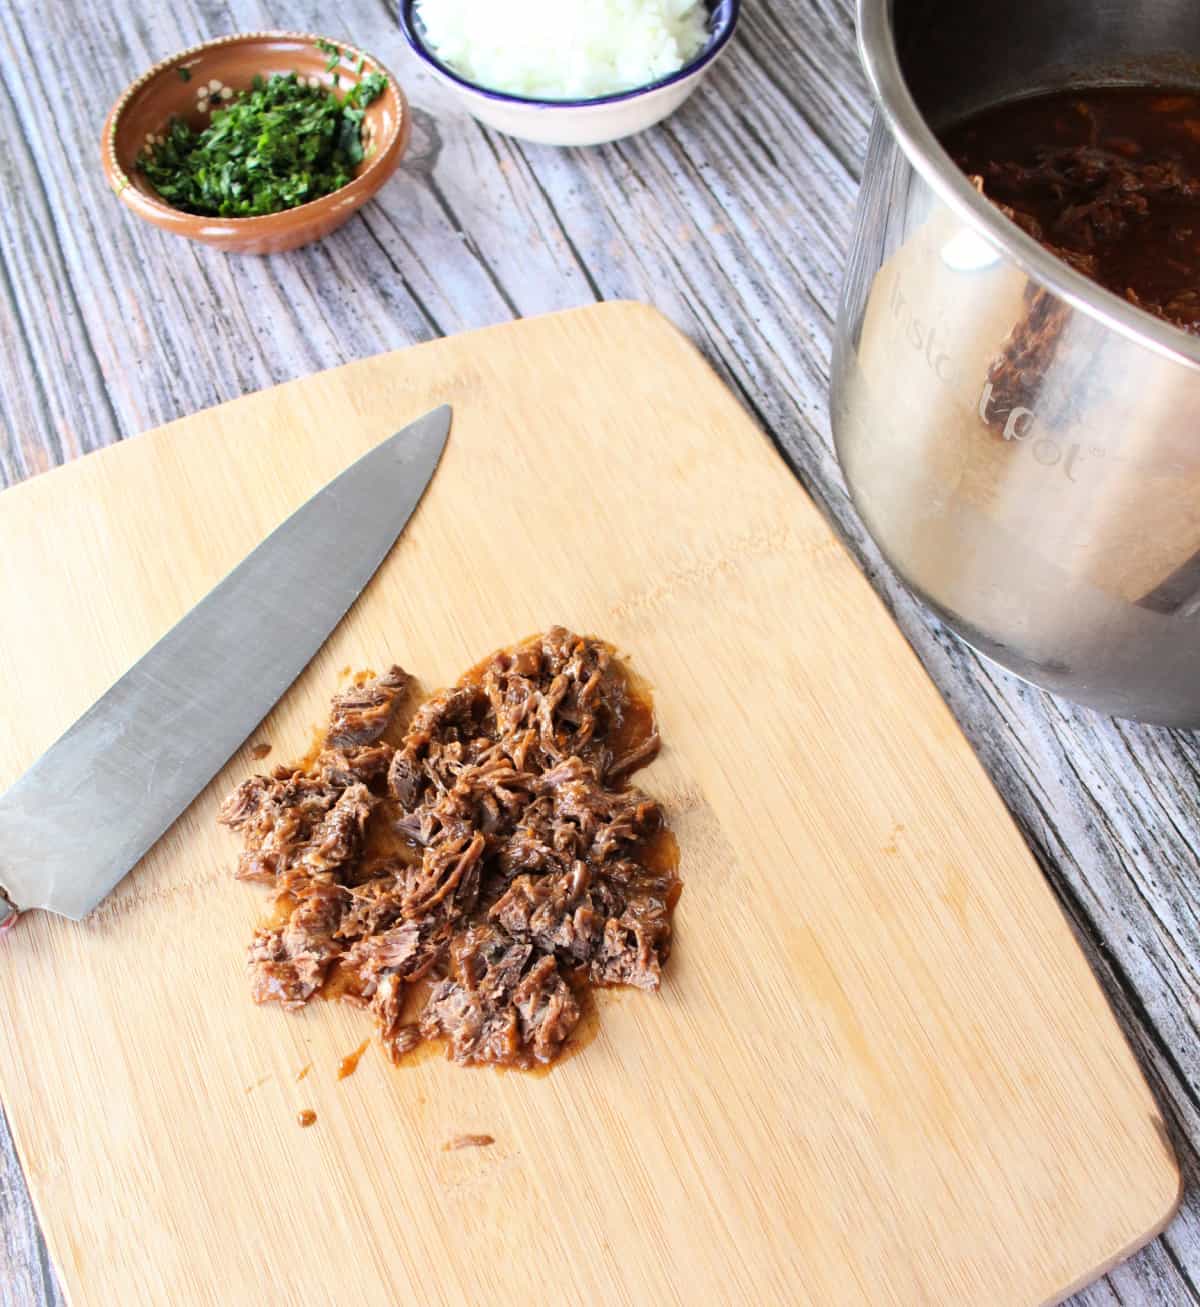 Chopped birria on a wooden cutting board next to a knife.